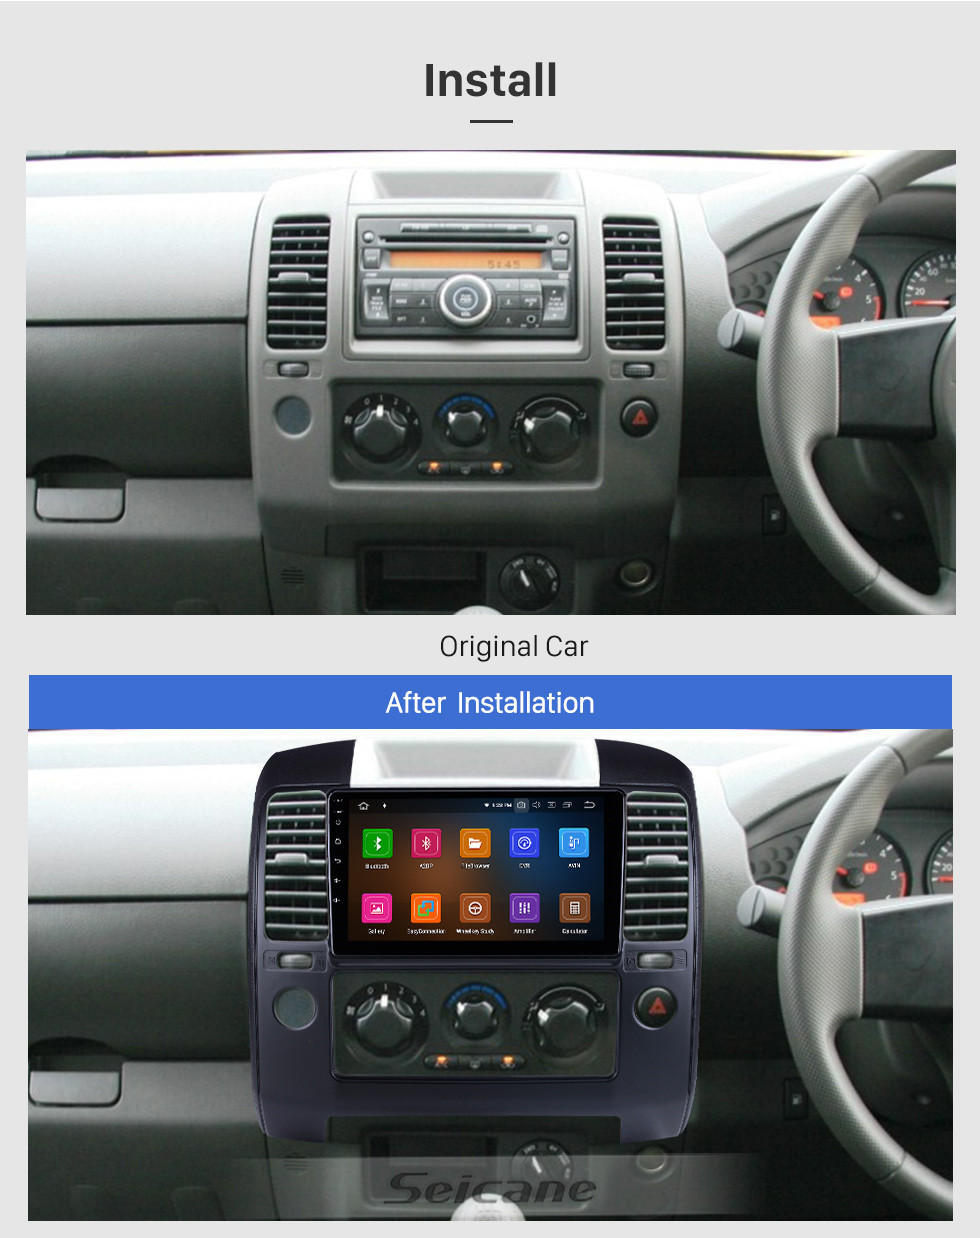 Seicane OEM Android 11.0 for 2006-2012 Nissan NAVARA Radio with Bluetooth 9 inch HD Touchscreen GPS Navigation System Carplay support DSP